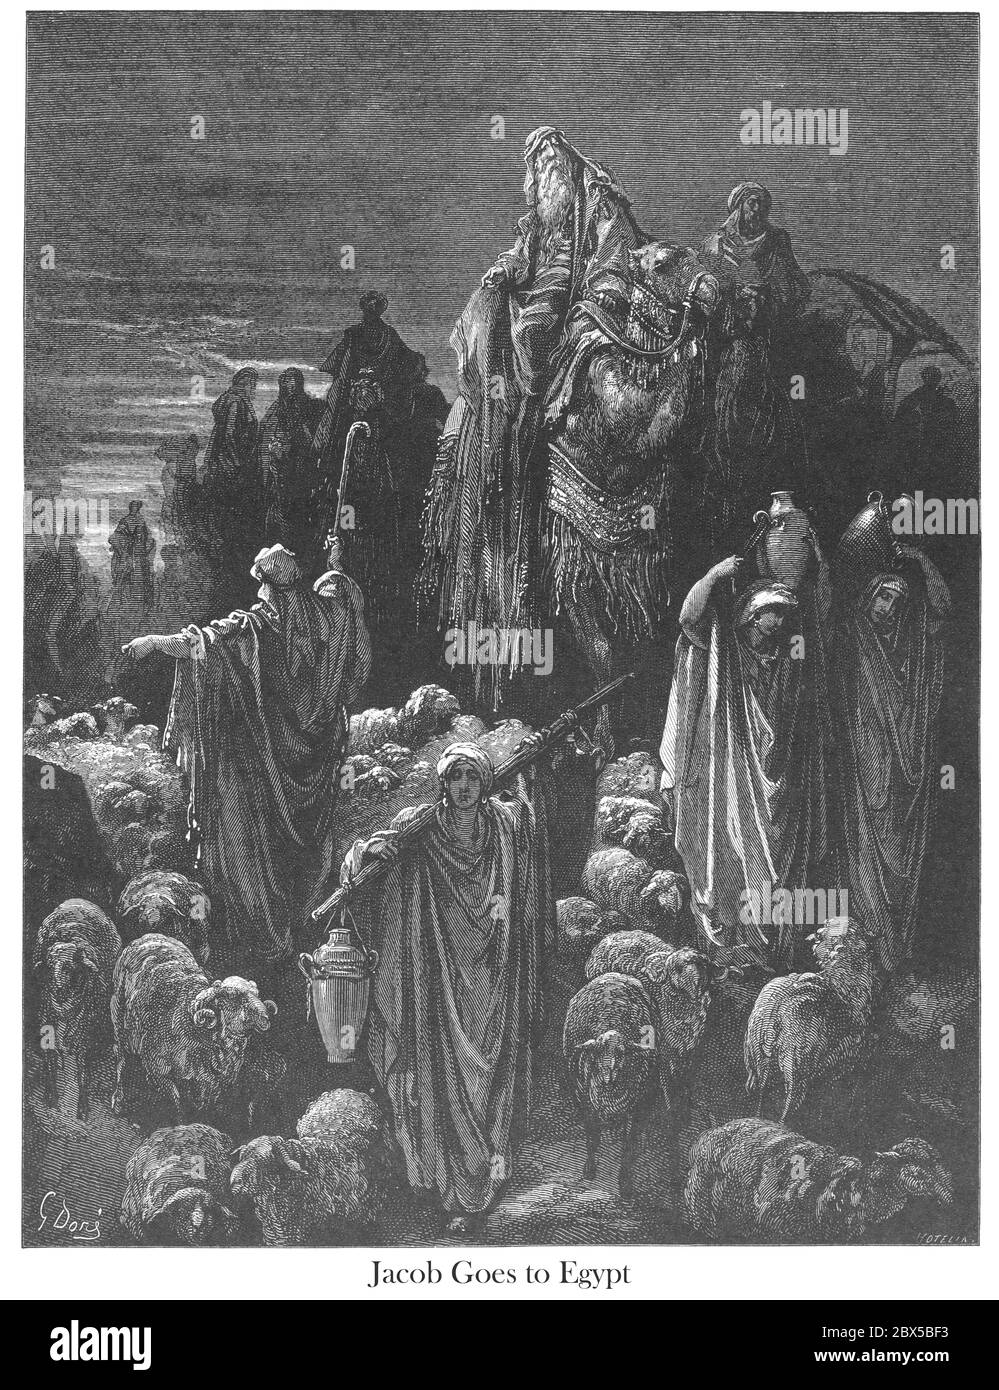 Jacob goes to Egypt Genesis 46:5 From the book 'Bible Gallery' Illustrated by Gustave Dore with Memoir of Doré and Descriptive Letter-press by Talbot W. Chambers D.D. Published by Cassell & Company Limited in London and simultaneously by Mame in Tours, France in 1866 Stock Photo